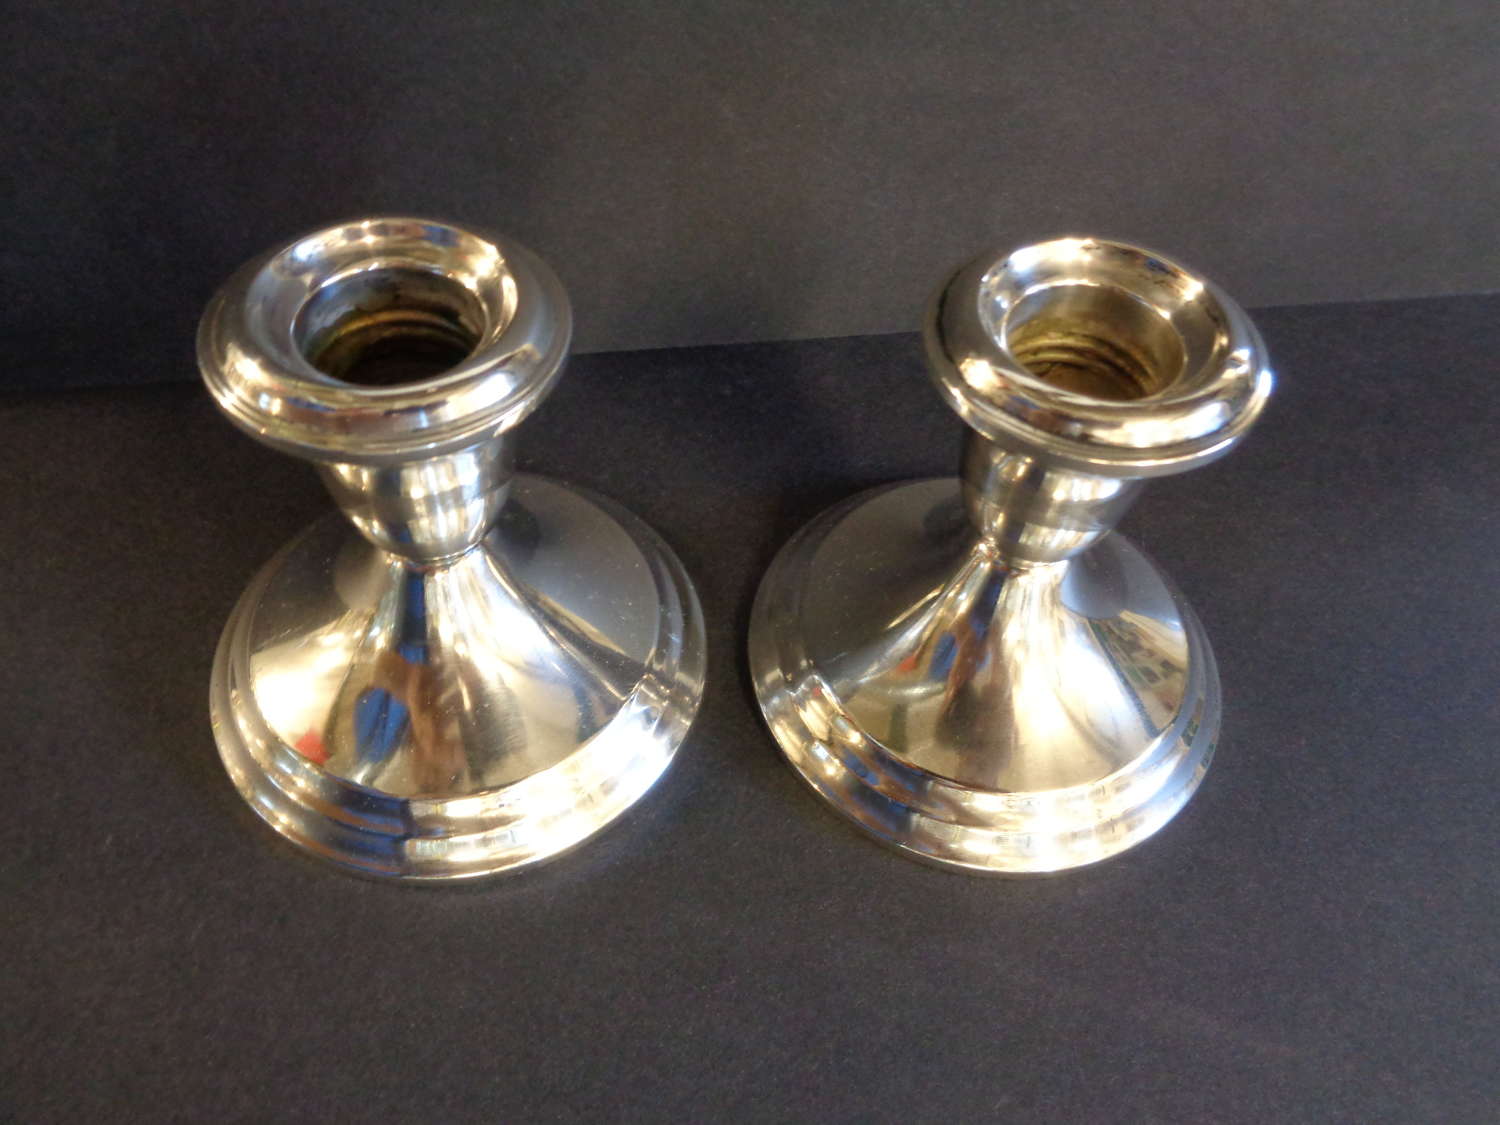 Gorham Sterling Silver Candlesticks - Weighted Bases